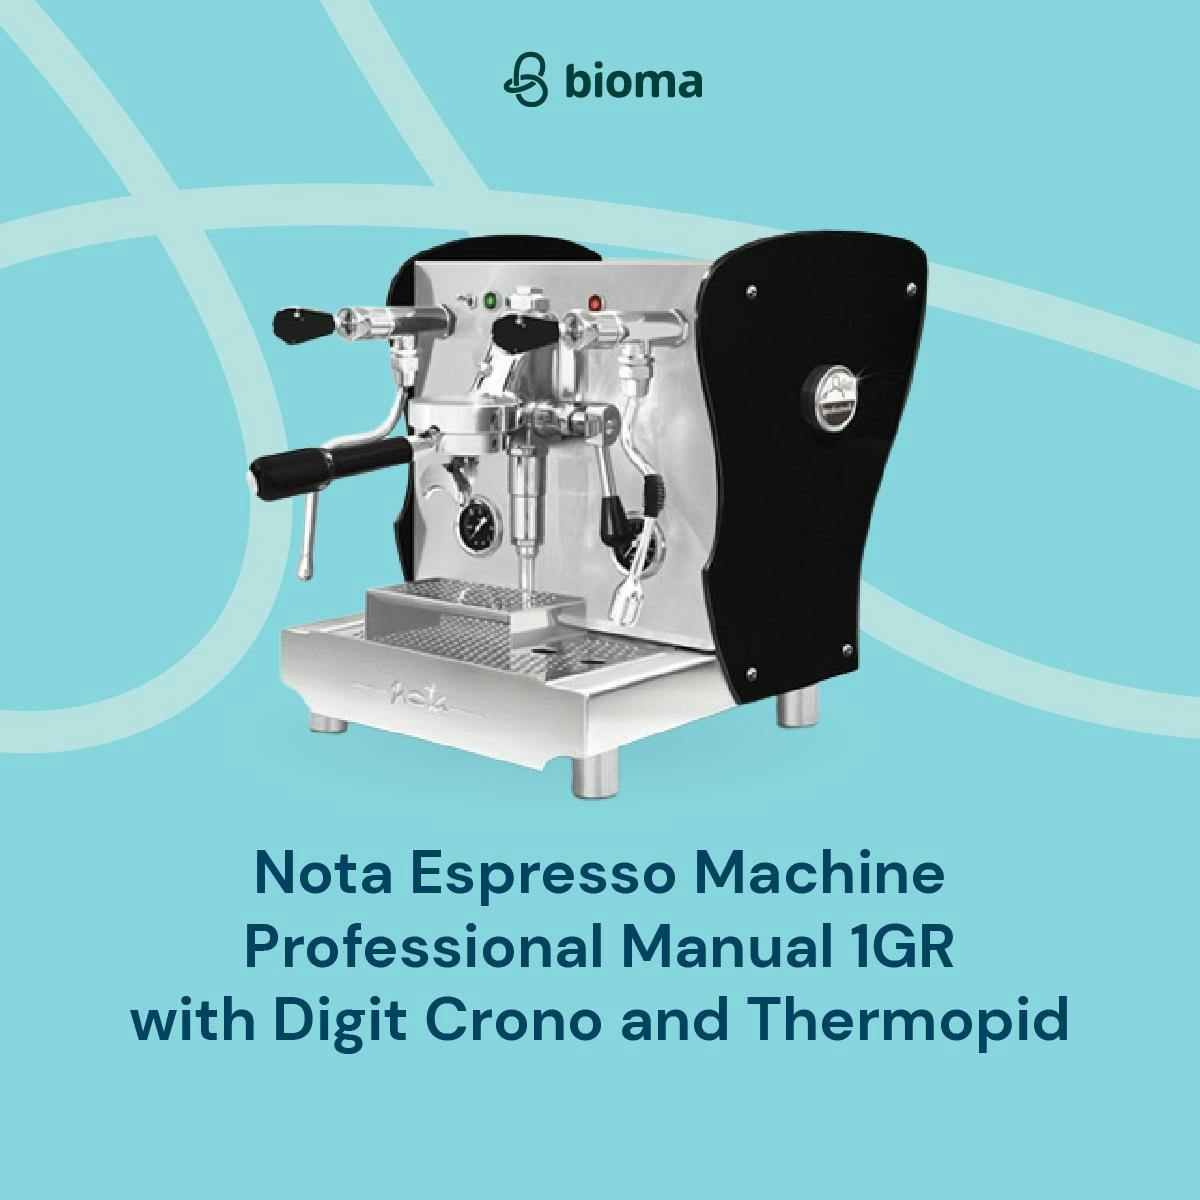 Nota Espresso Machine Professional Manual 1GR with Digit Crono and Thermopid (Black)